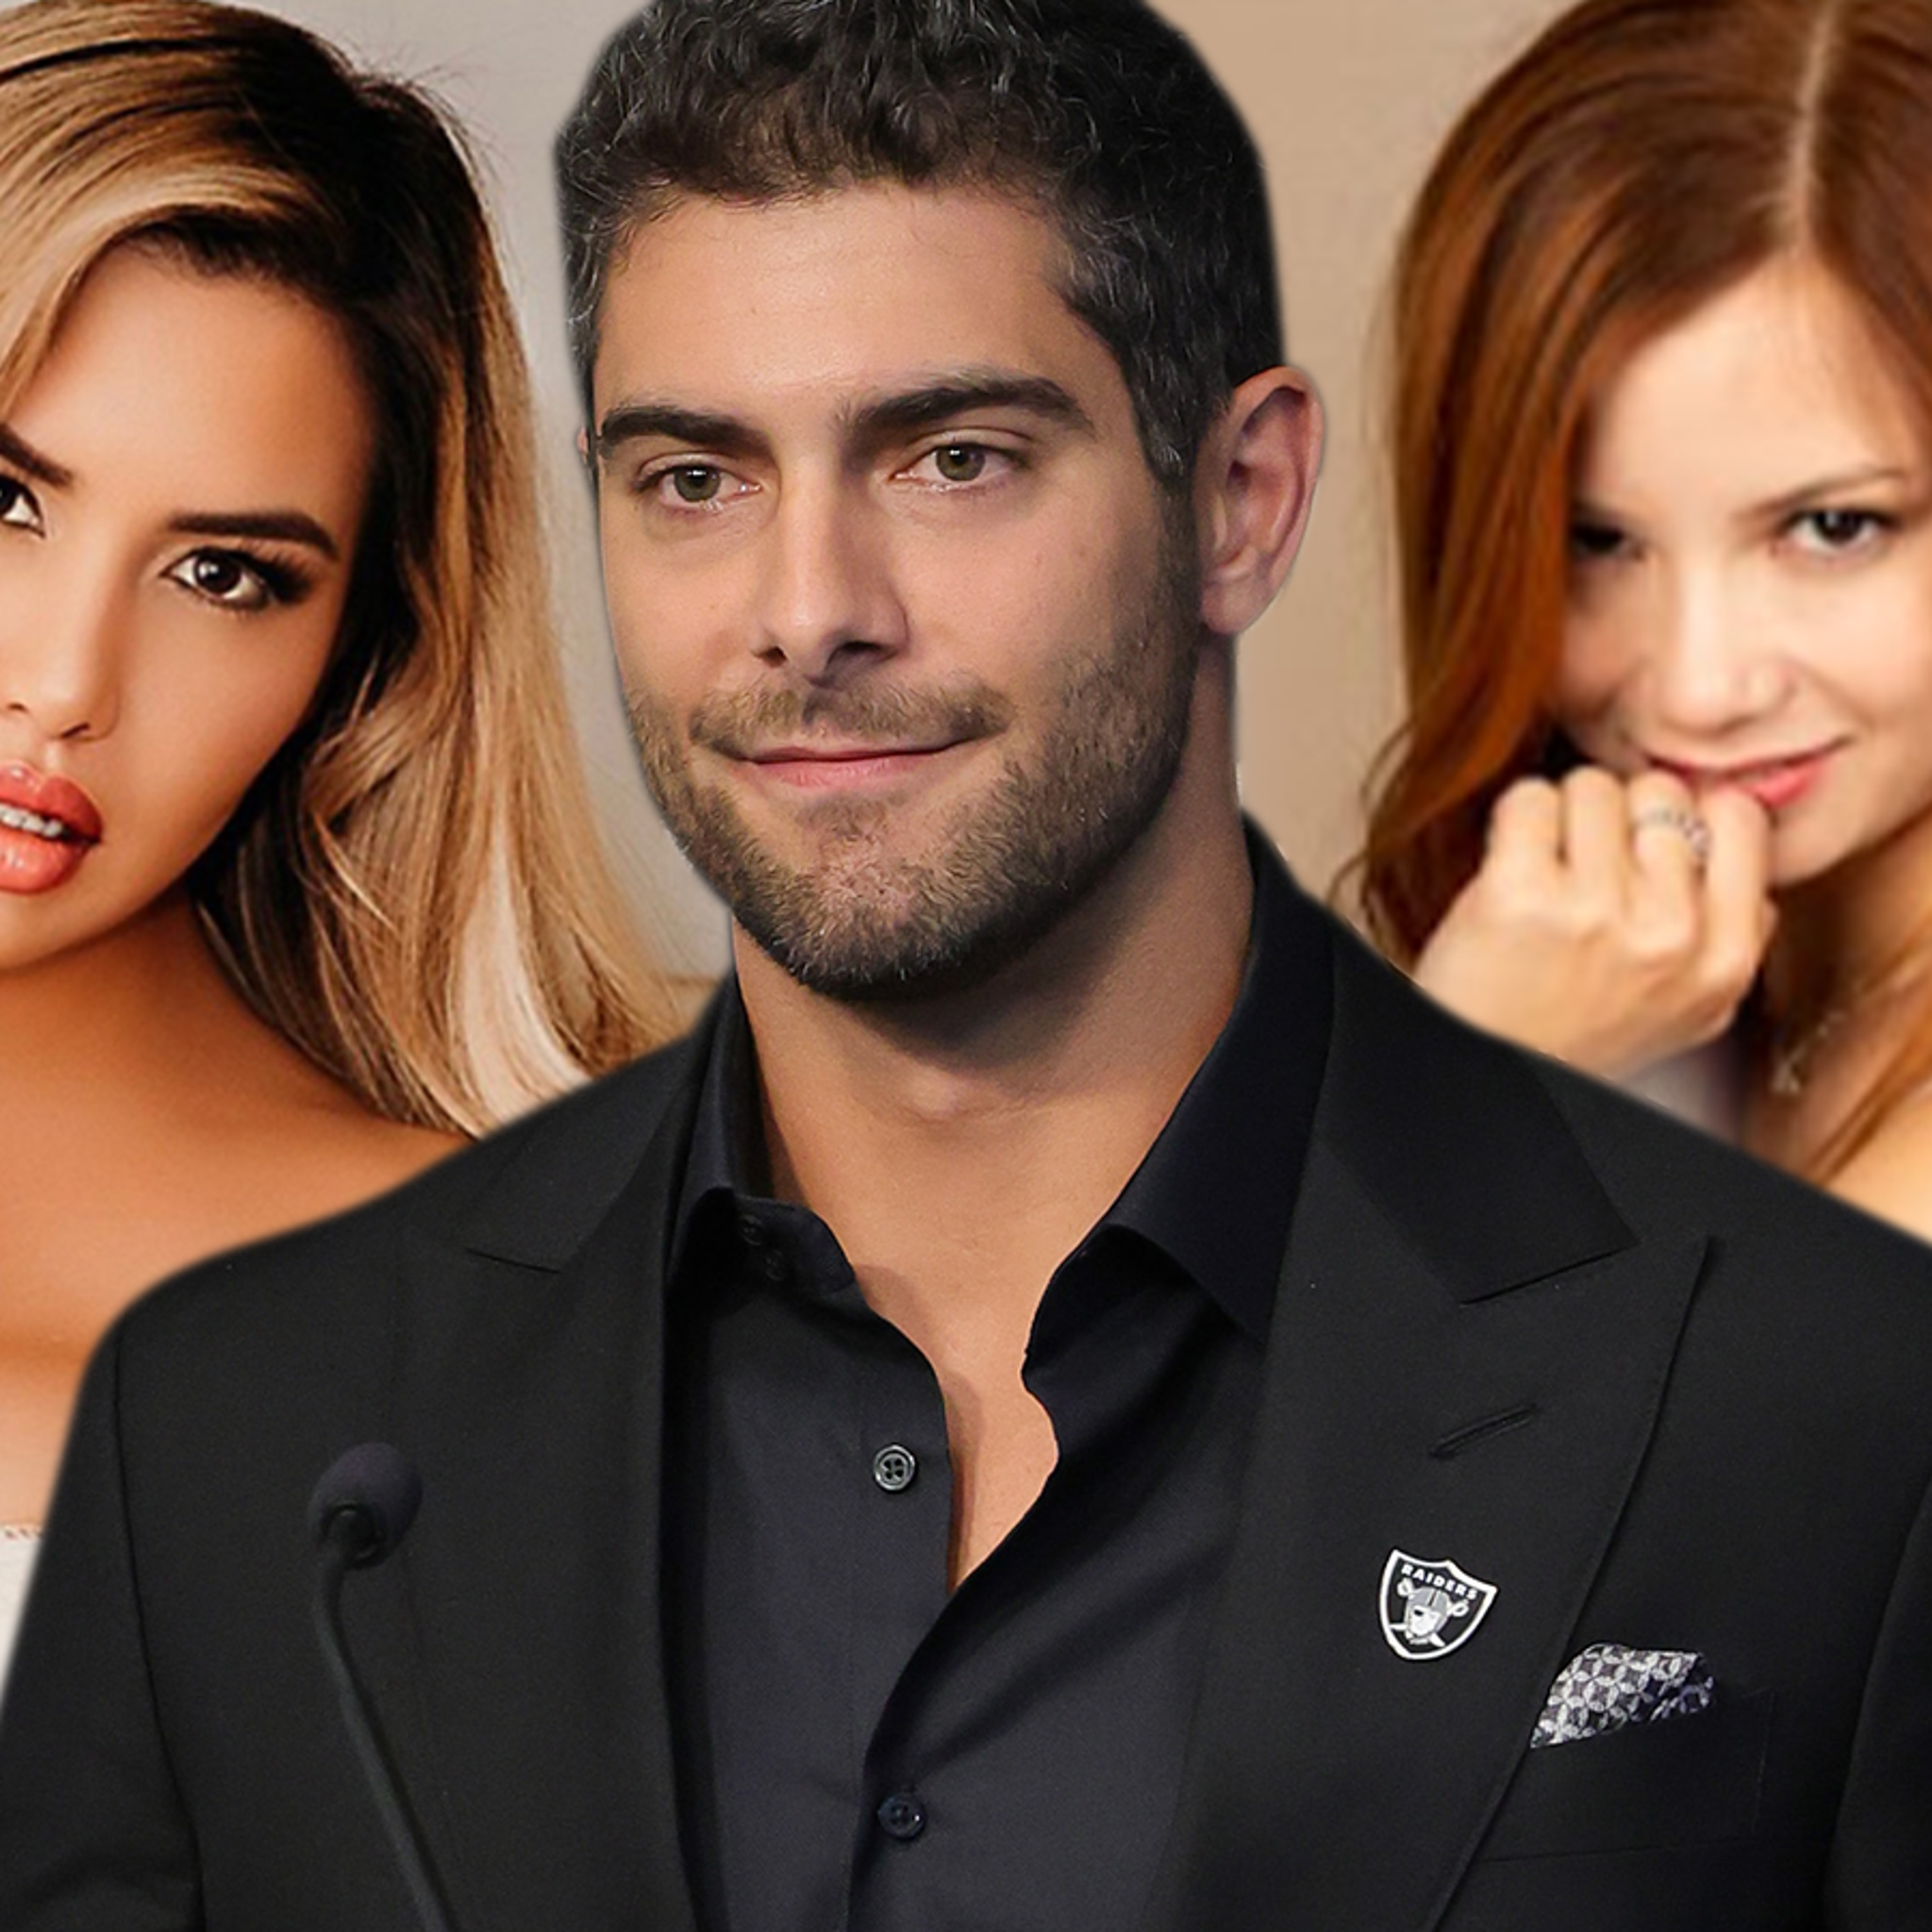 Jimmy Garoppolo Offered Free Sex For Life From Las Vegas Brothel Workers pic image